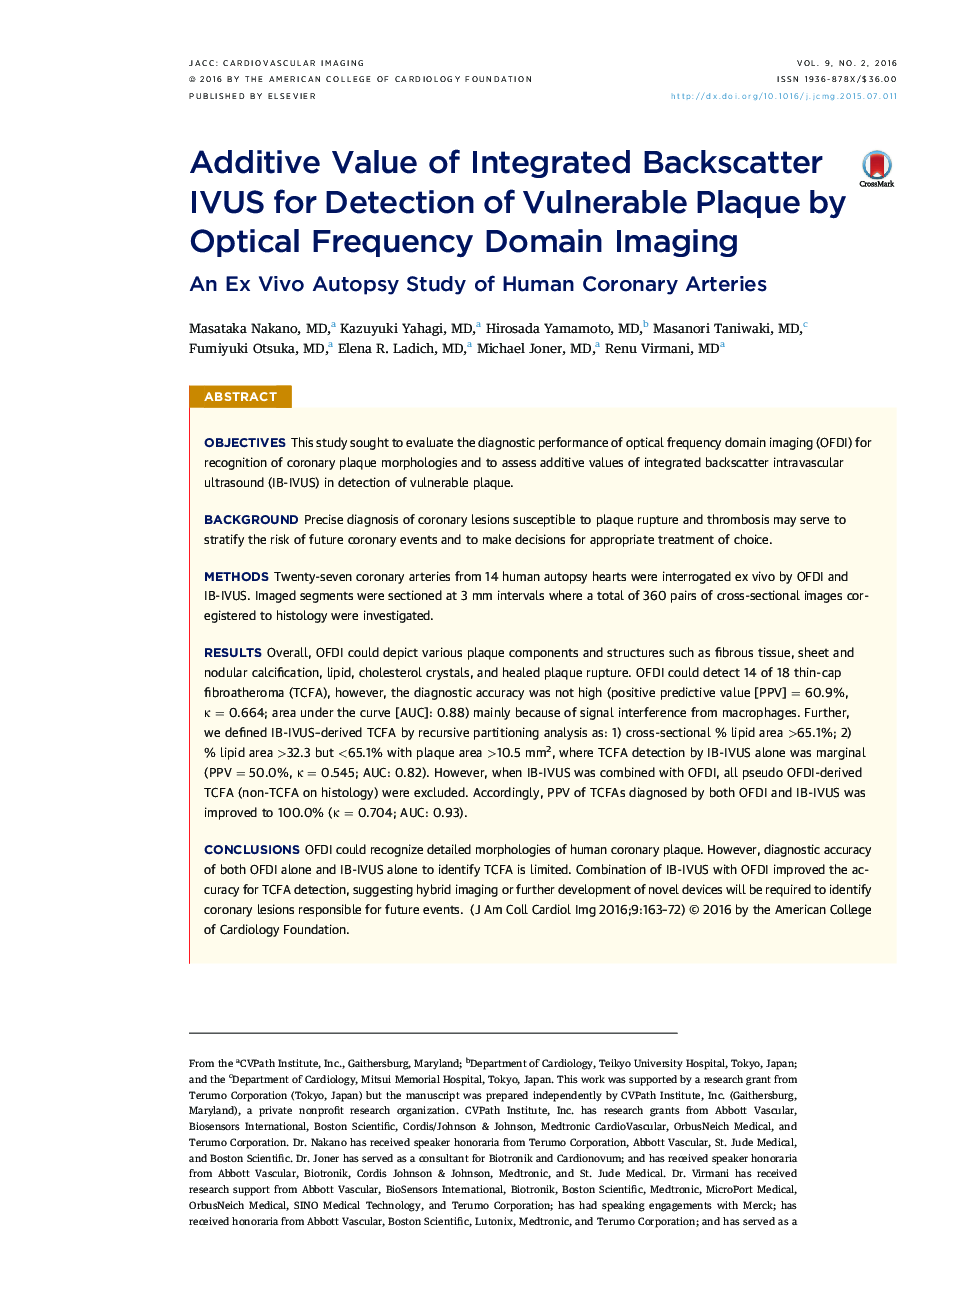 Additive Value of Integrated Backscatter IVUS for Detection of Vulnerable Plaque by Optical Frequency Domain Imaging : An Ex Vivo Autopsy Study of Human Coronary Arteries